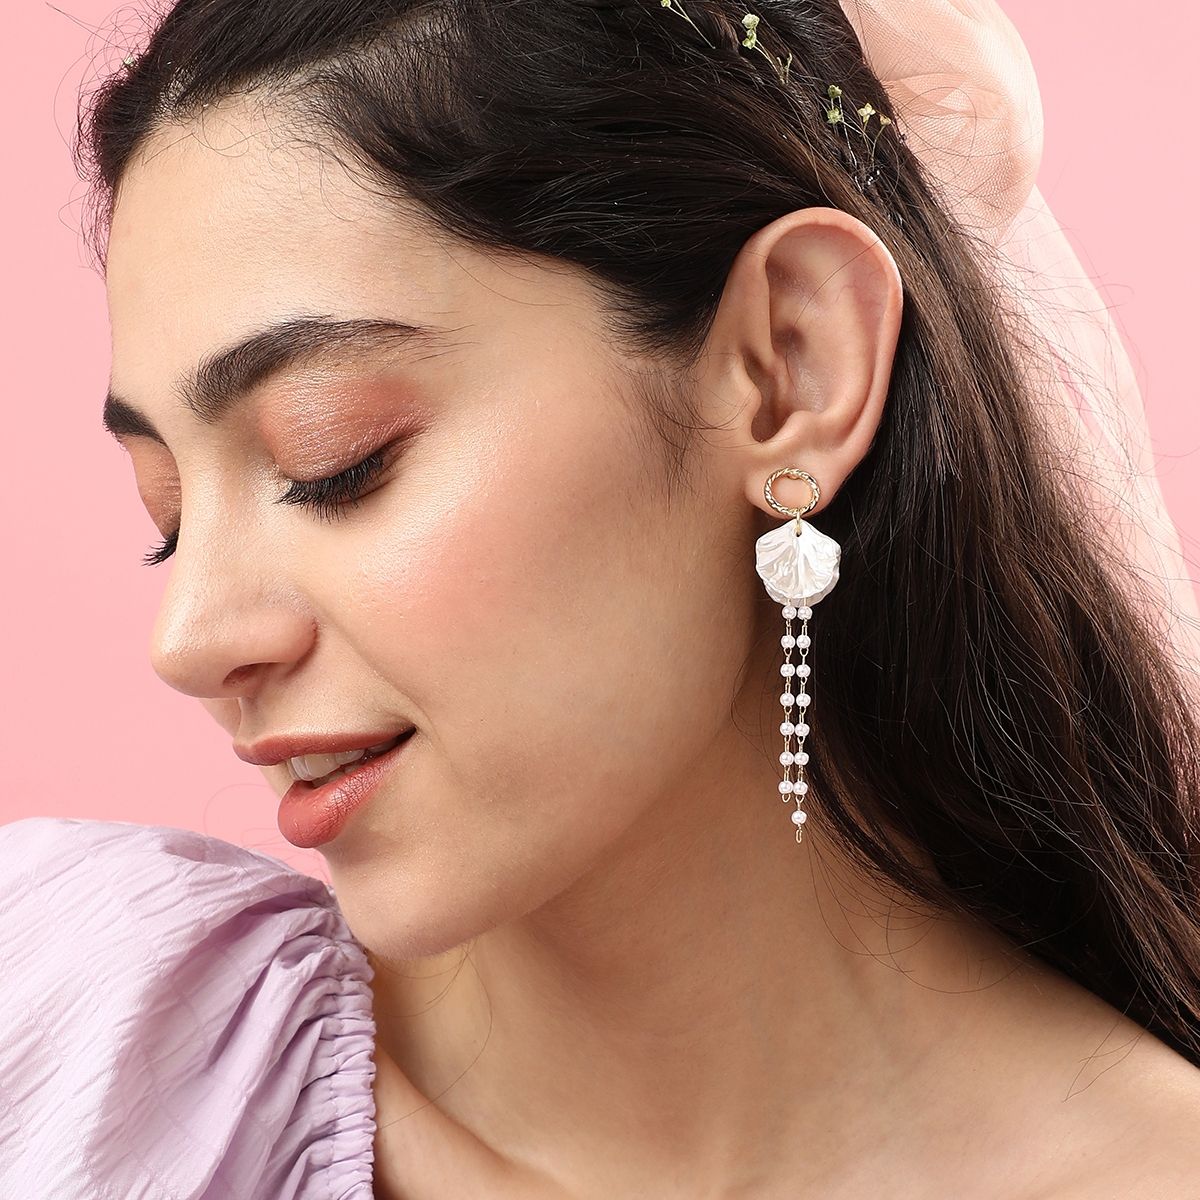 Buy Online Black Casual Earrings for Women  Girls at Best Prices in Biba  India WRJHEAR000008AW20BL